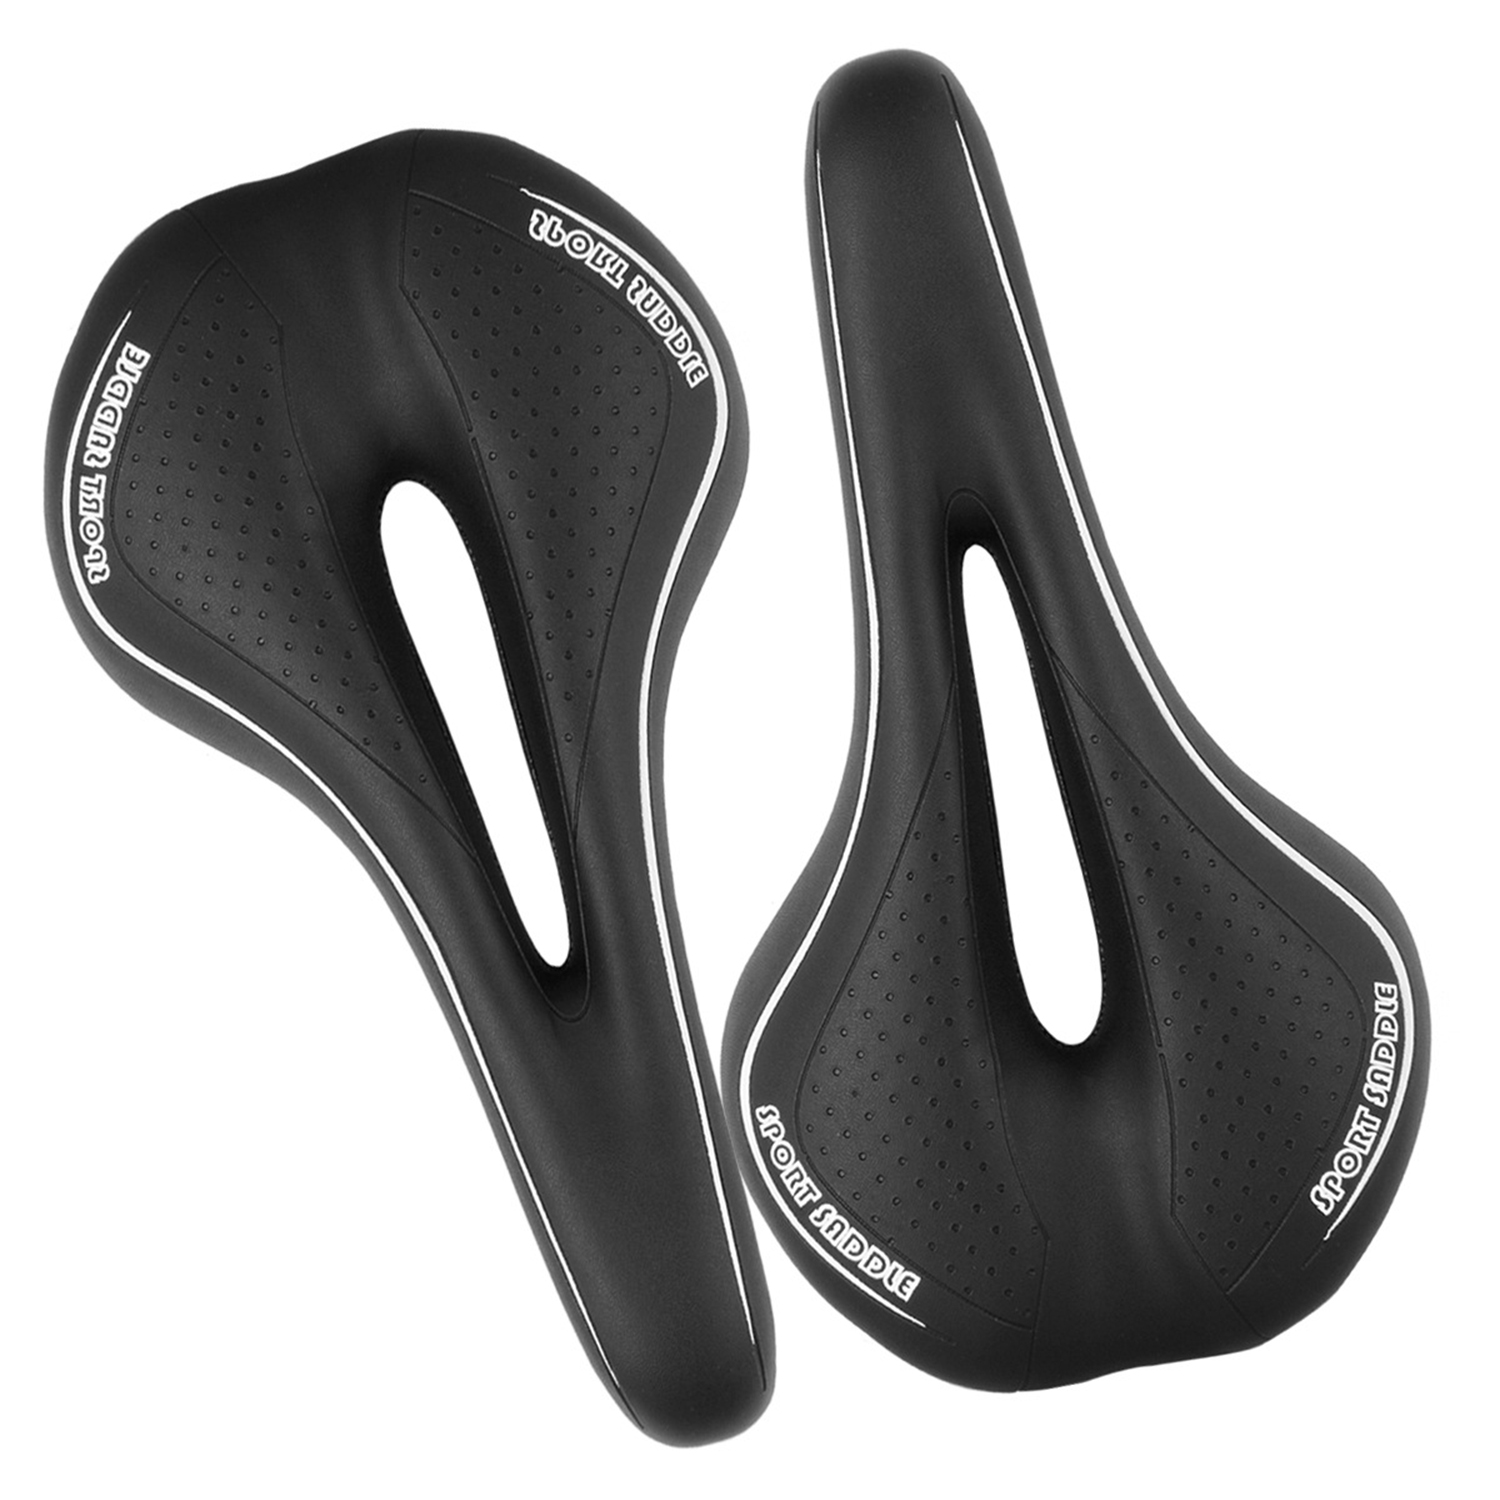 EZGO Bike Seat Mountain Bicycle Seat Saddle Breathable Soft Padded with Hollow Central Relief Zone Black - image 1 of 5